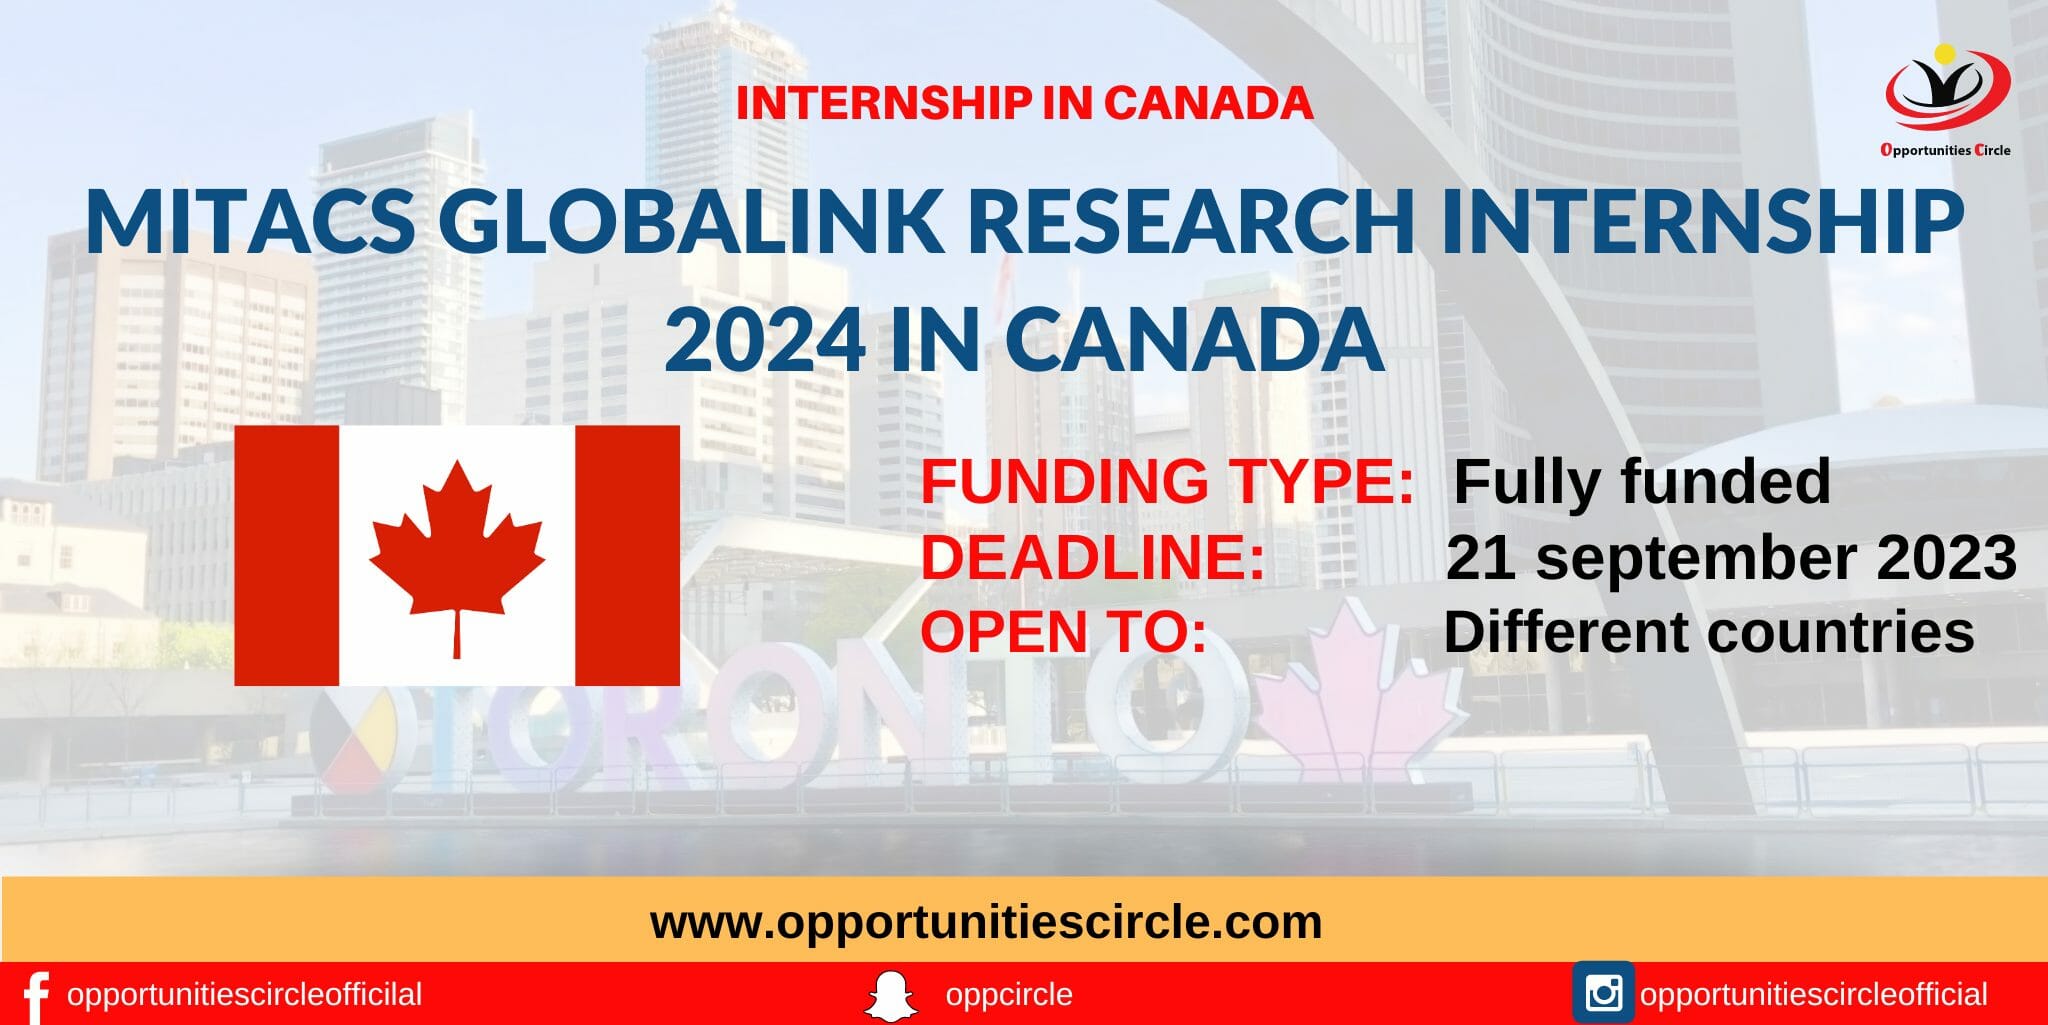 MITACS Globalink Research Internship 2024 in Canada Fully Funded